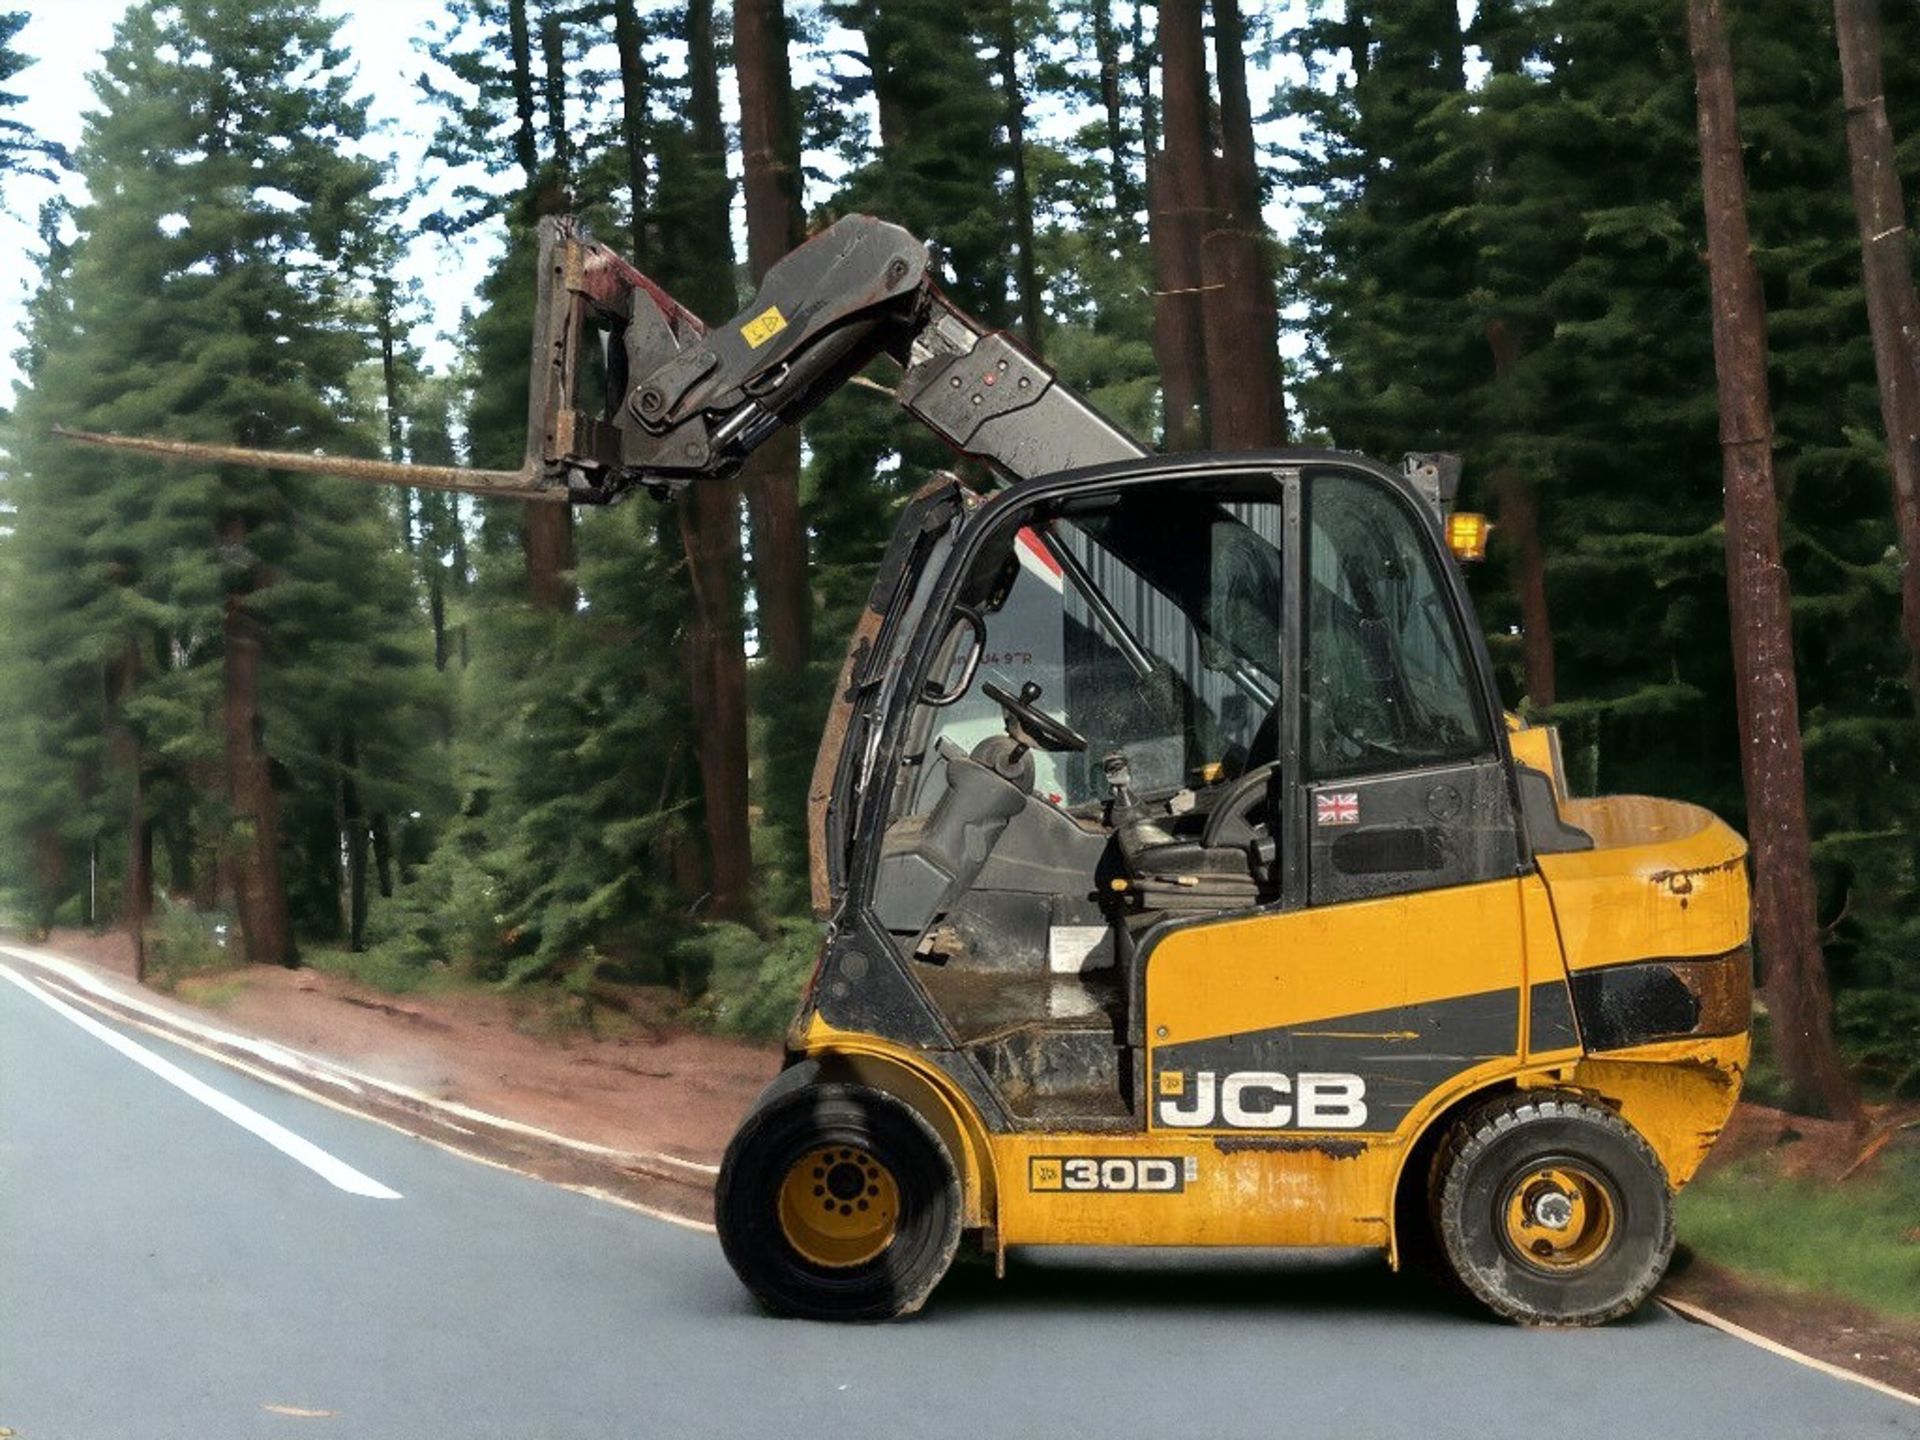 2014 JCB TELETRUK TLT30D TELEHANDLER - RELIABLE, EFFICIENT, AND READY TO WORK - Image 3 of 9